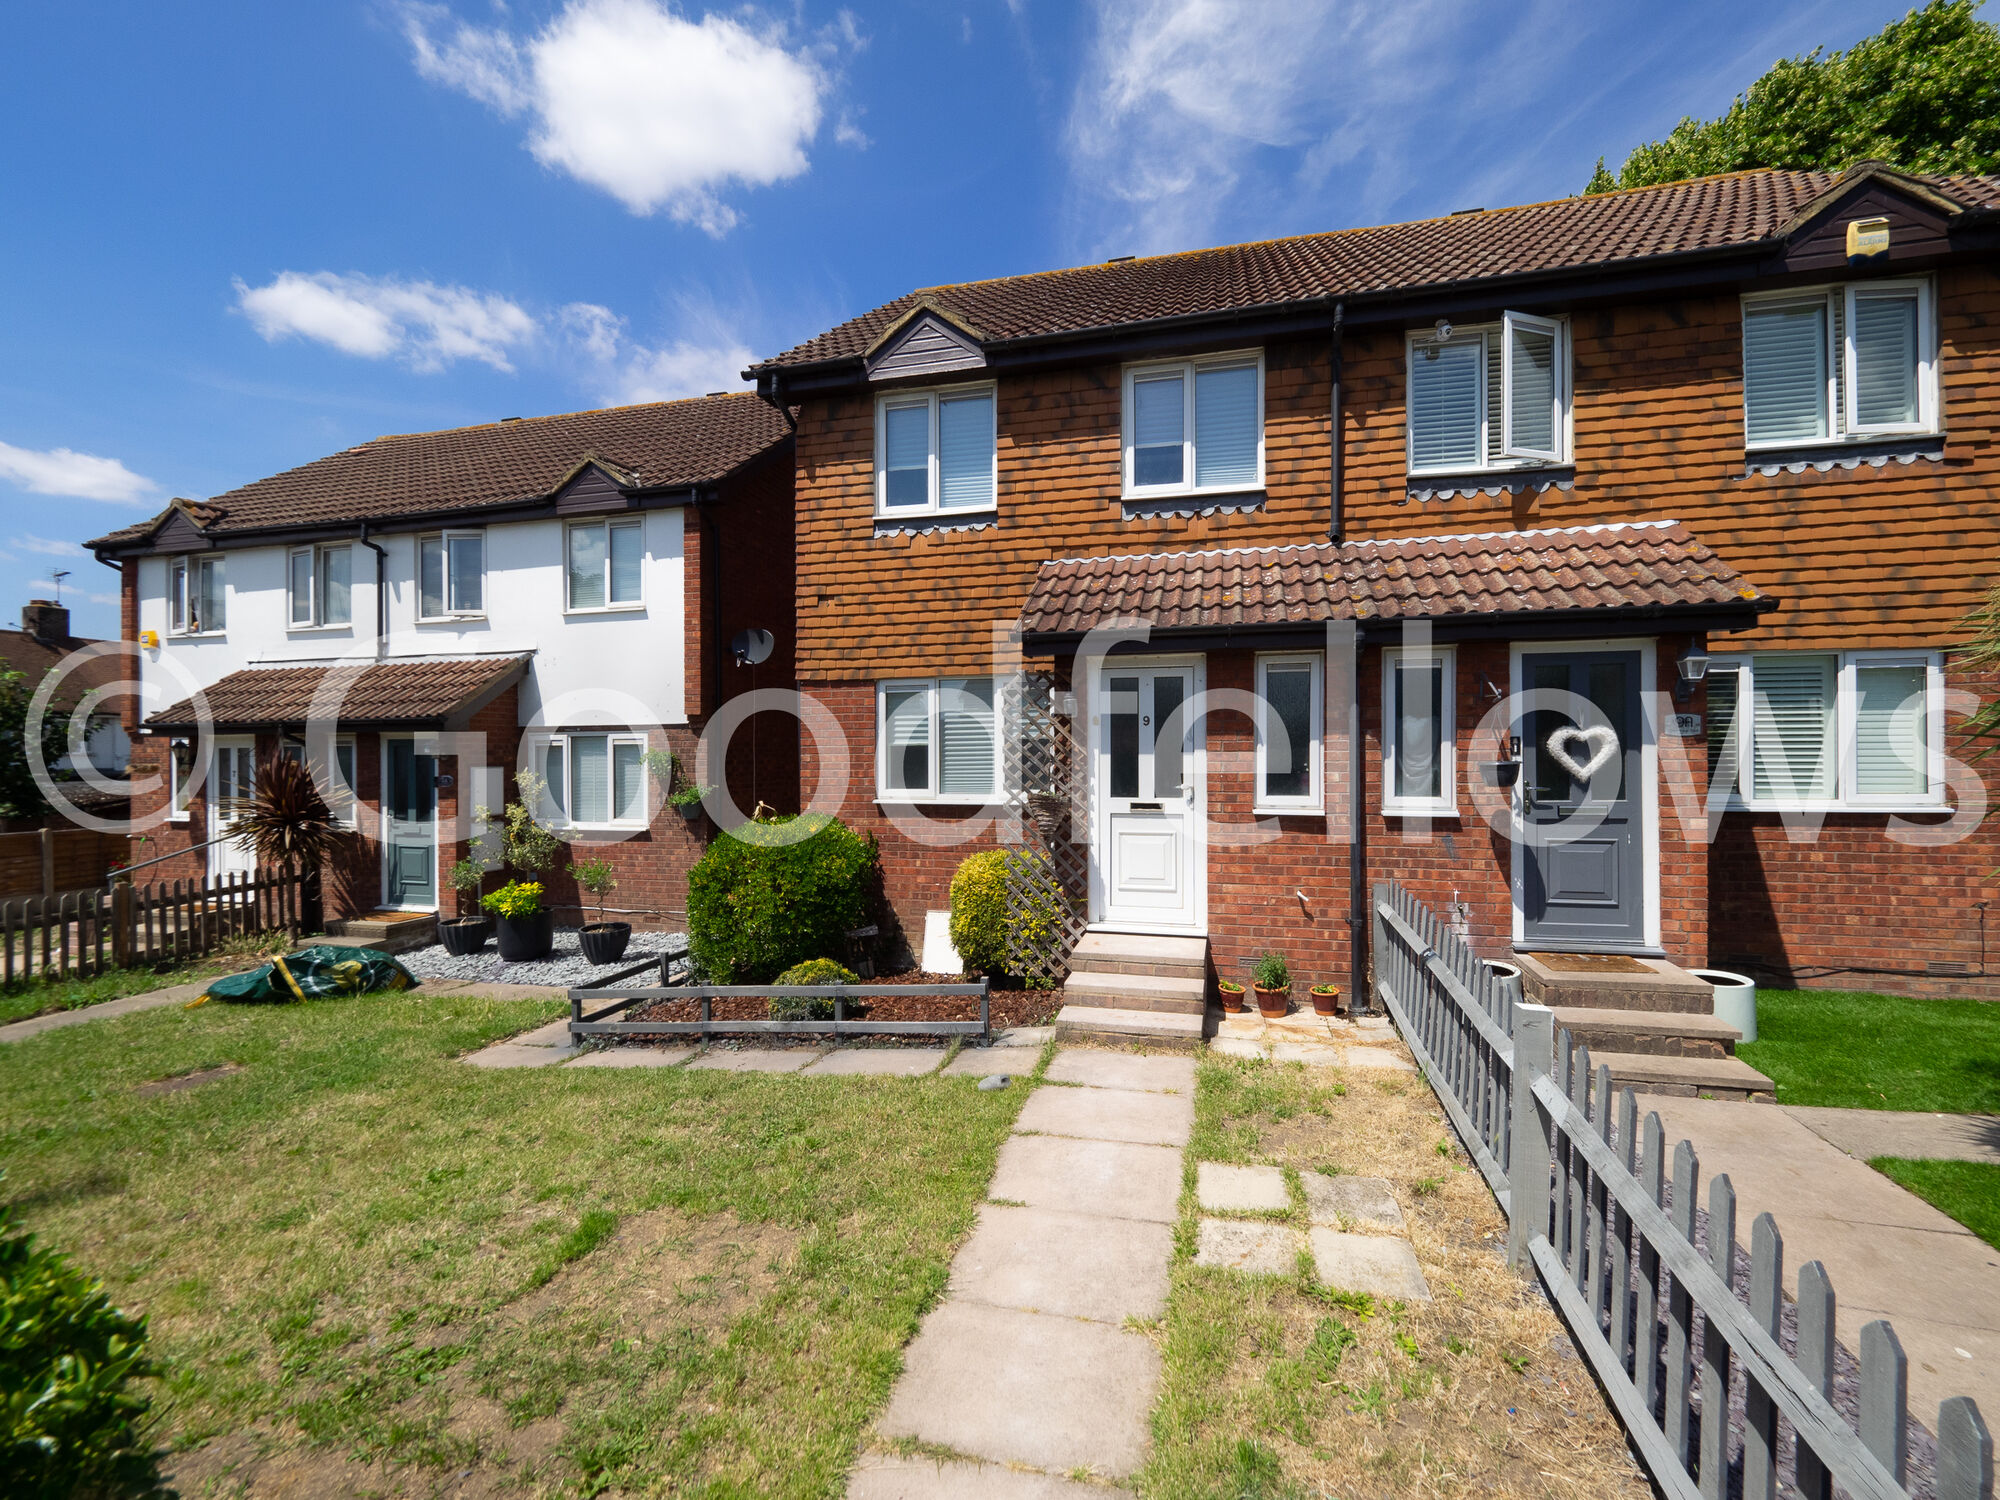 3 bedroom  house to rent, Available now Crossways Road, Mitcham, CR4, main image